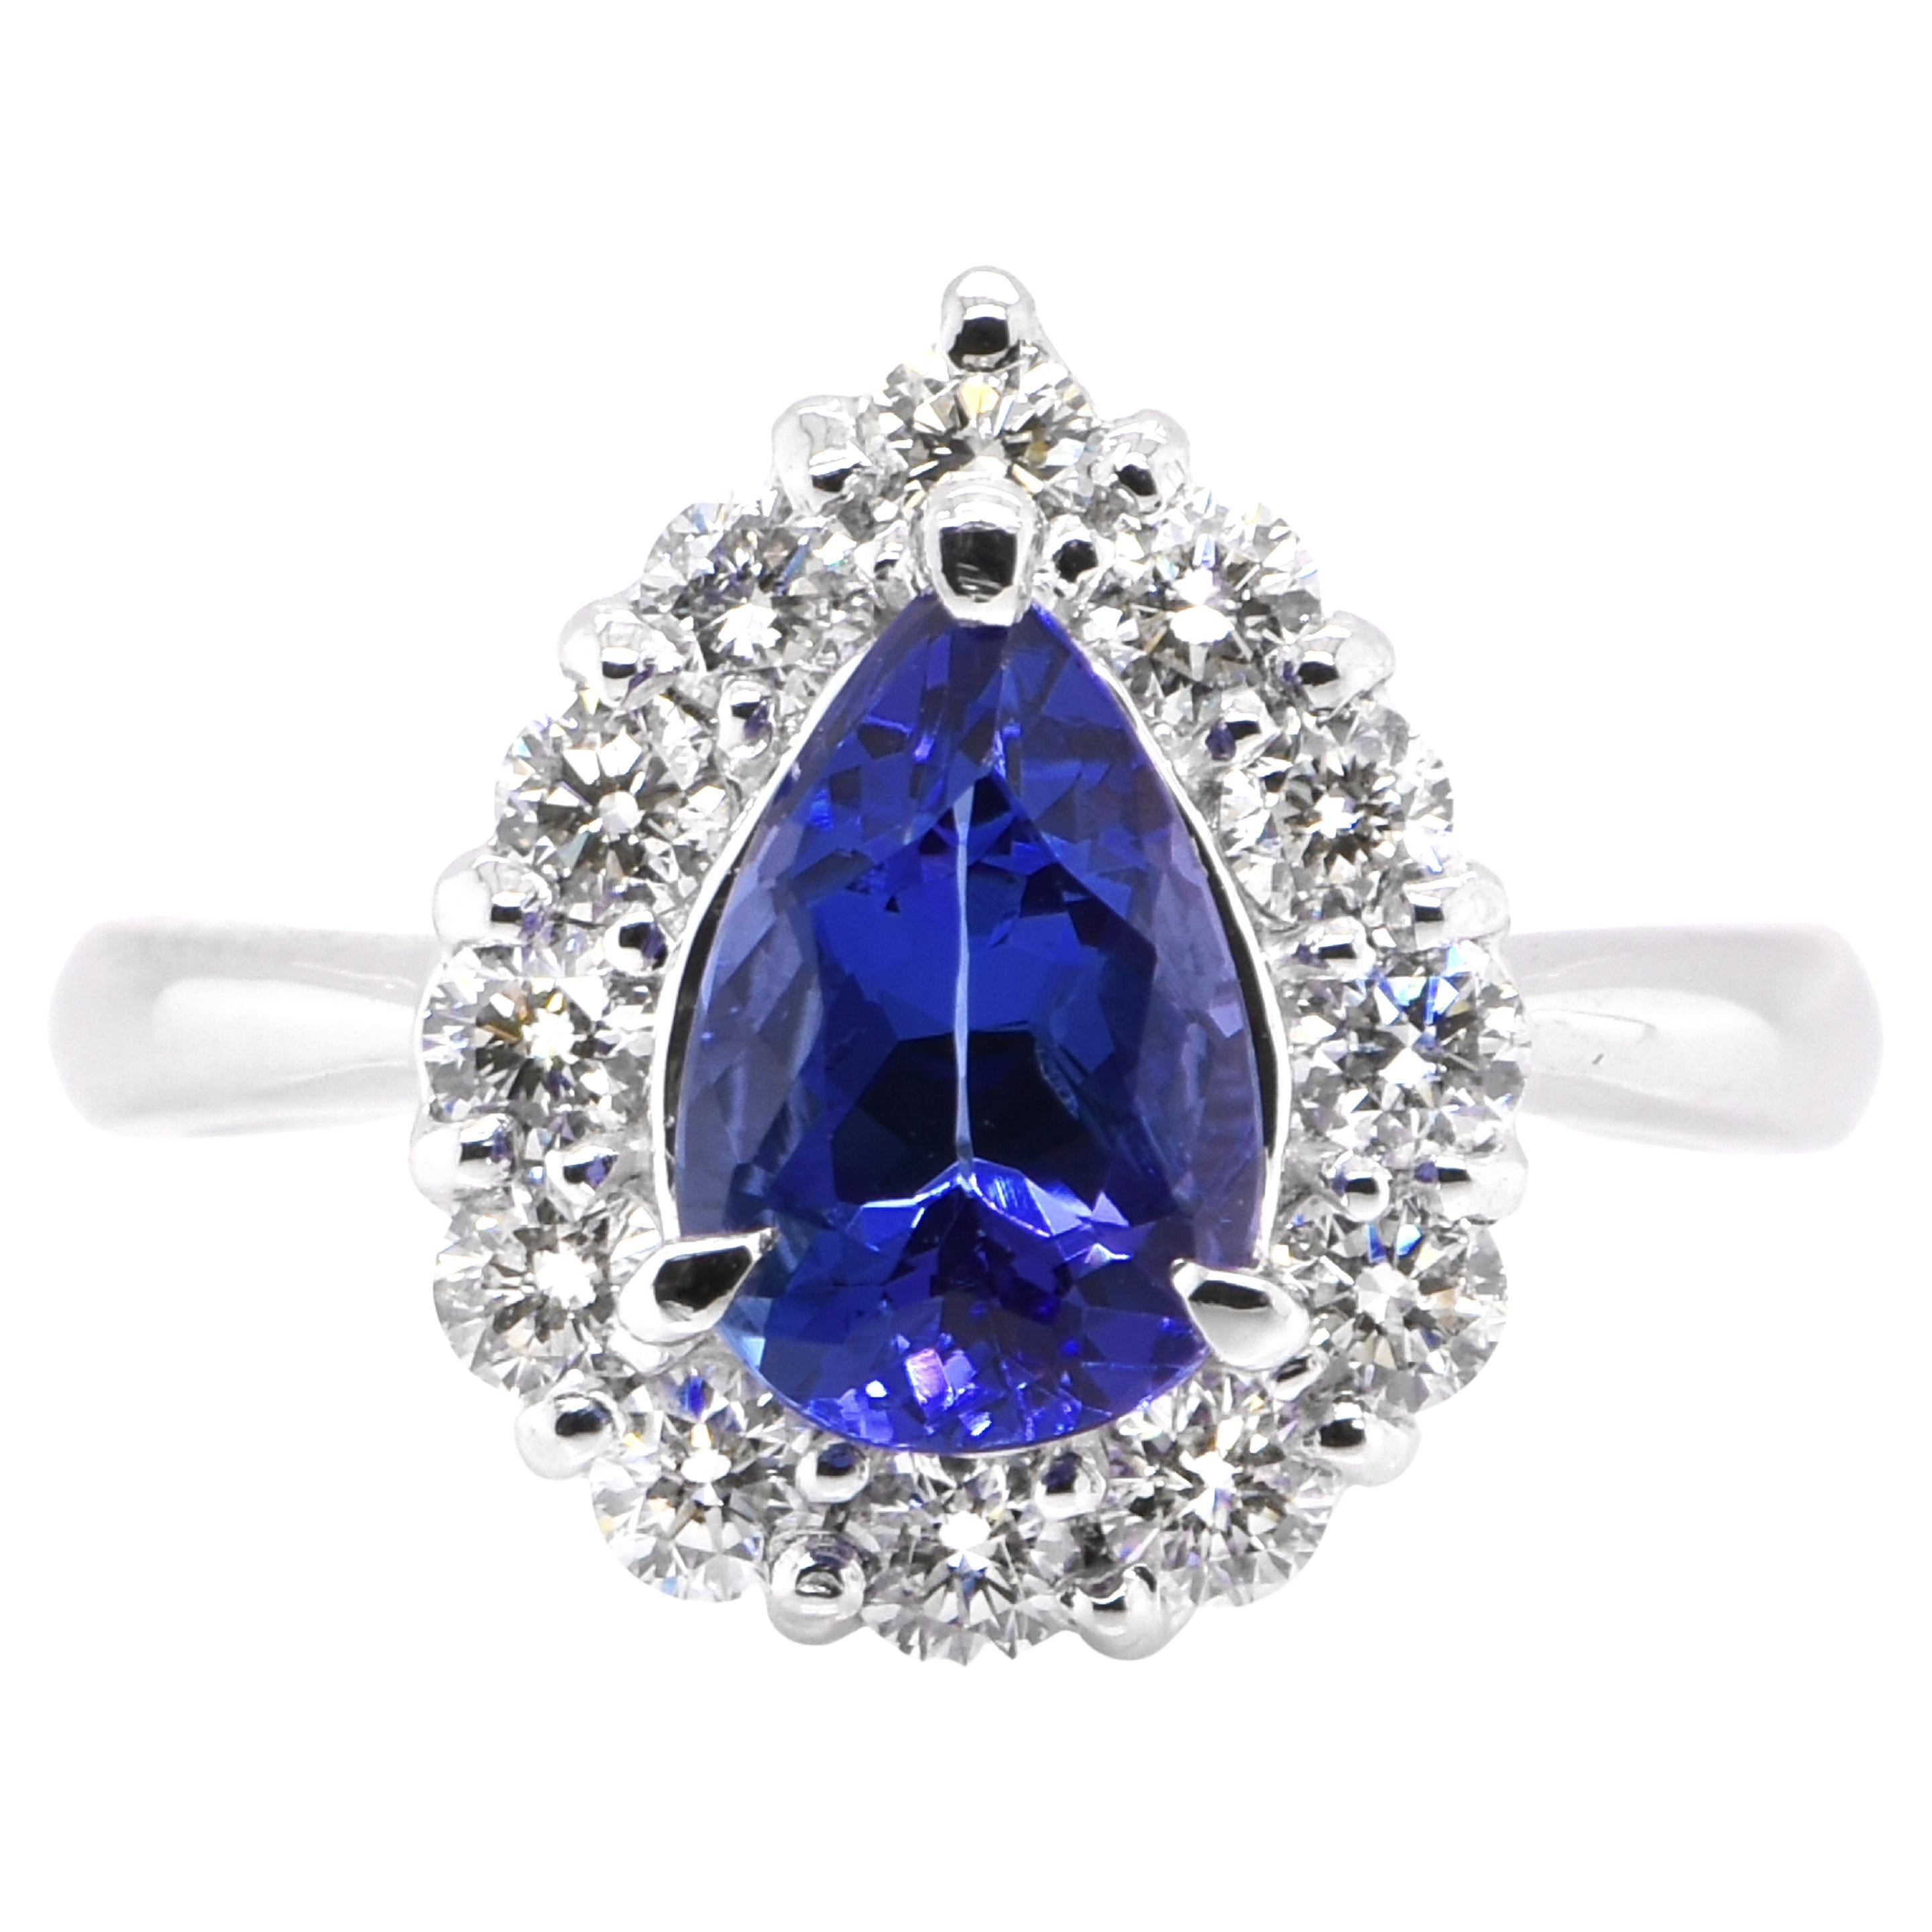 1.69 Carat Natural Pear Cut AAA+ Tanzanite and Diamond Ring Set in Platinum For Sale